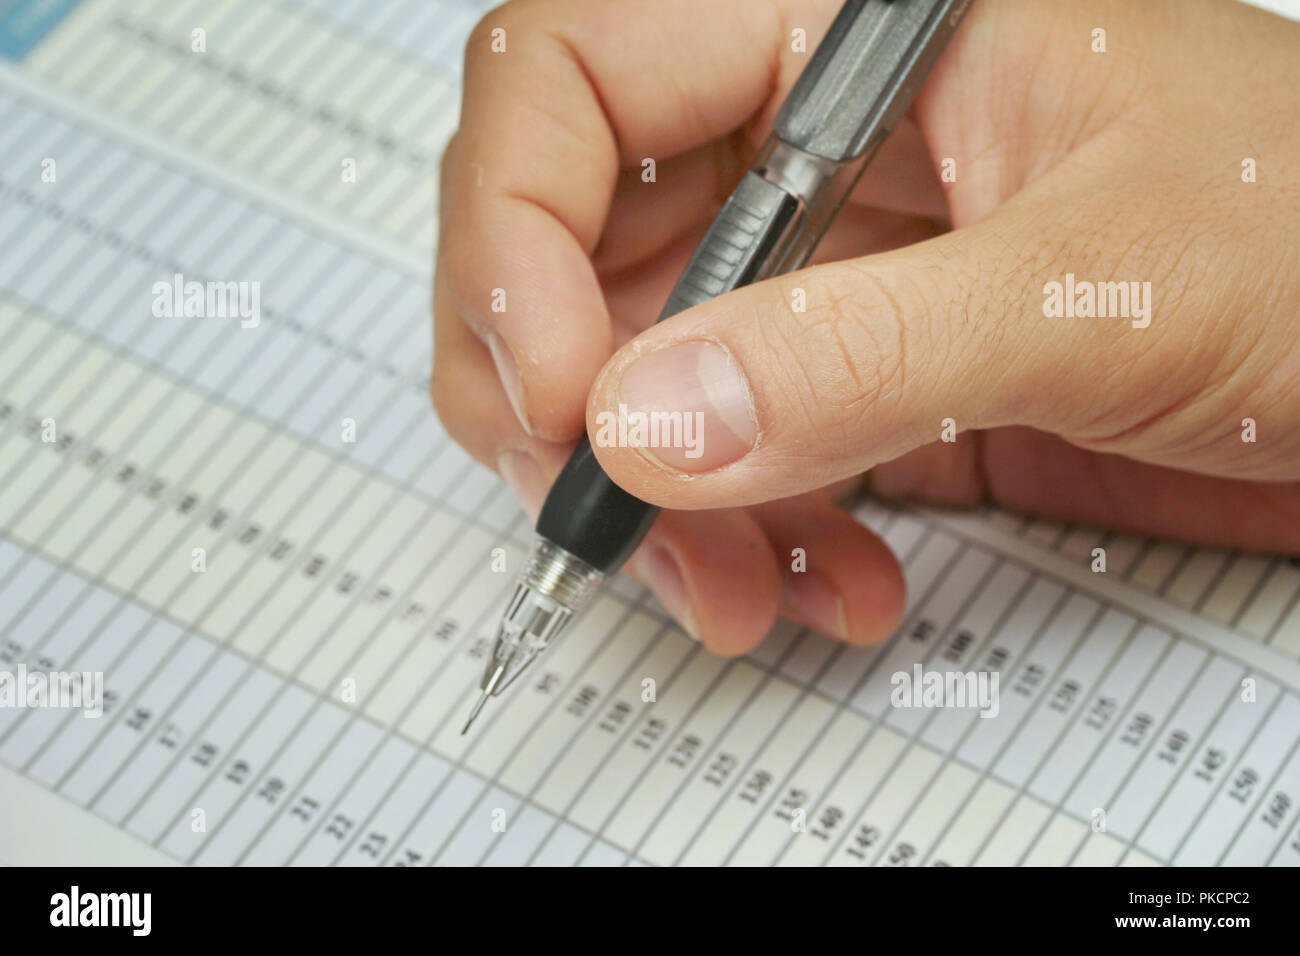 Right hand pencil extrusion preparation work on the paper that is a piece of work. Stock Photo